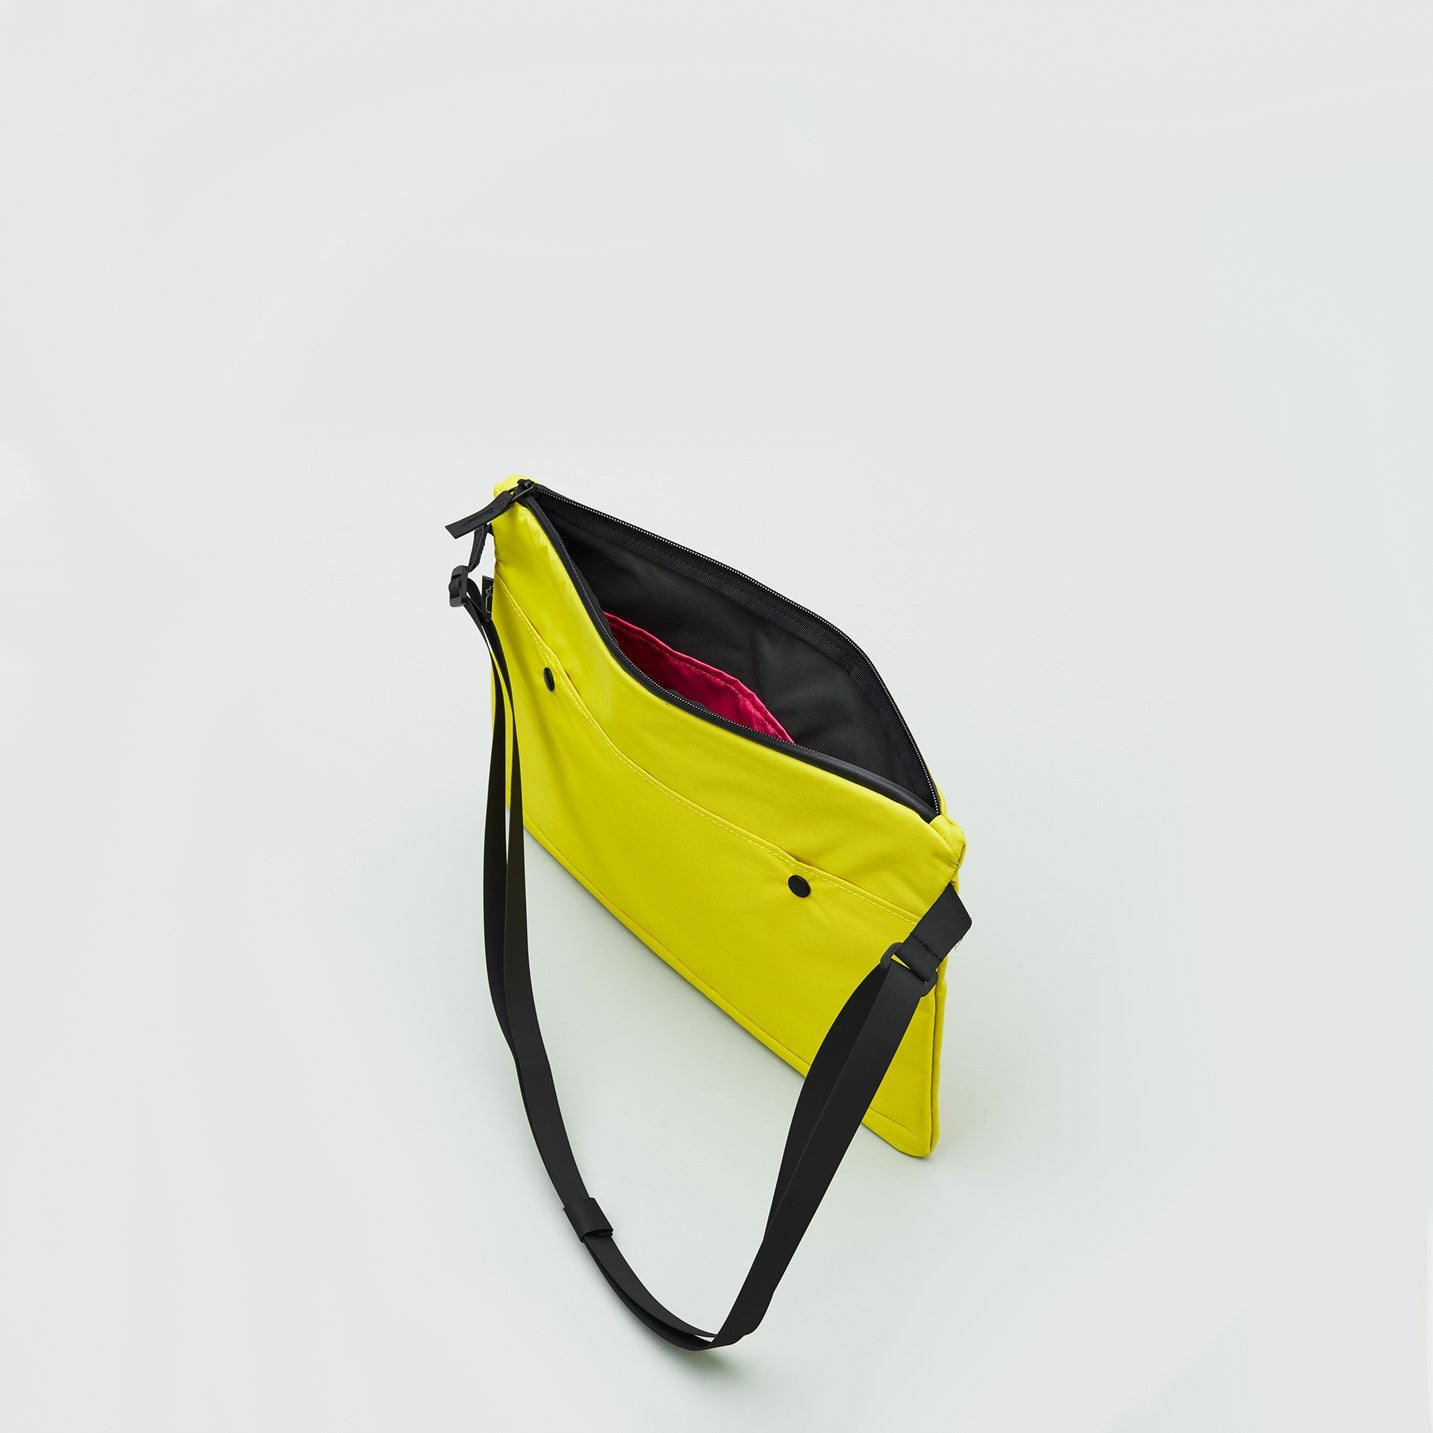 Le Musette yellow